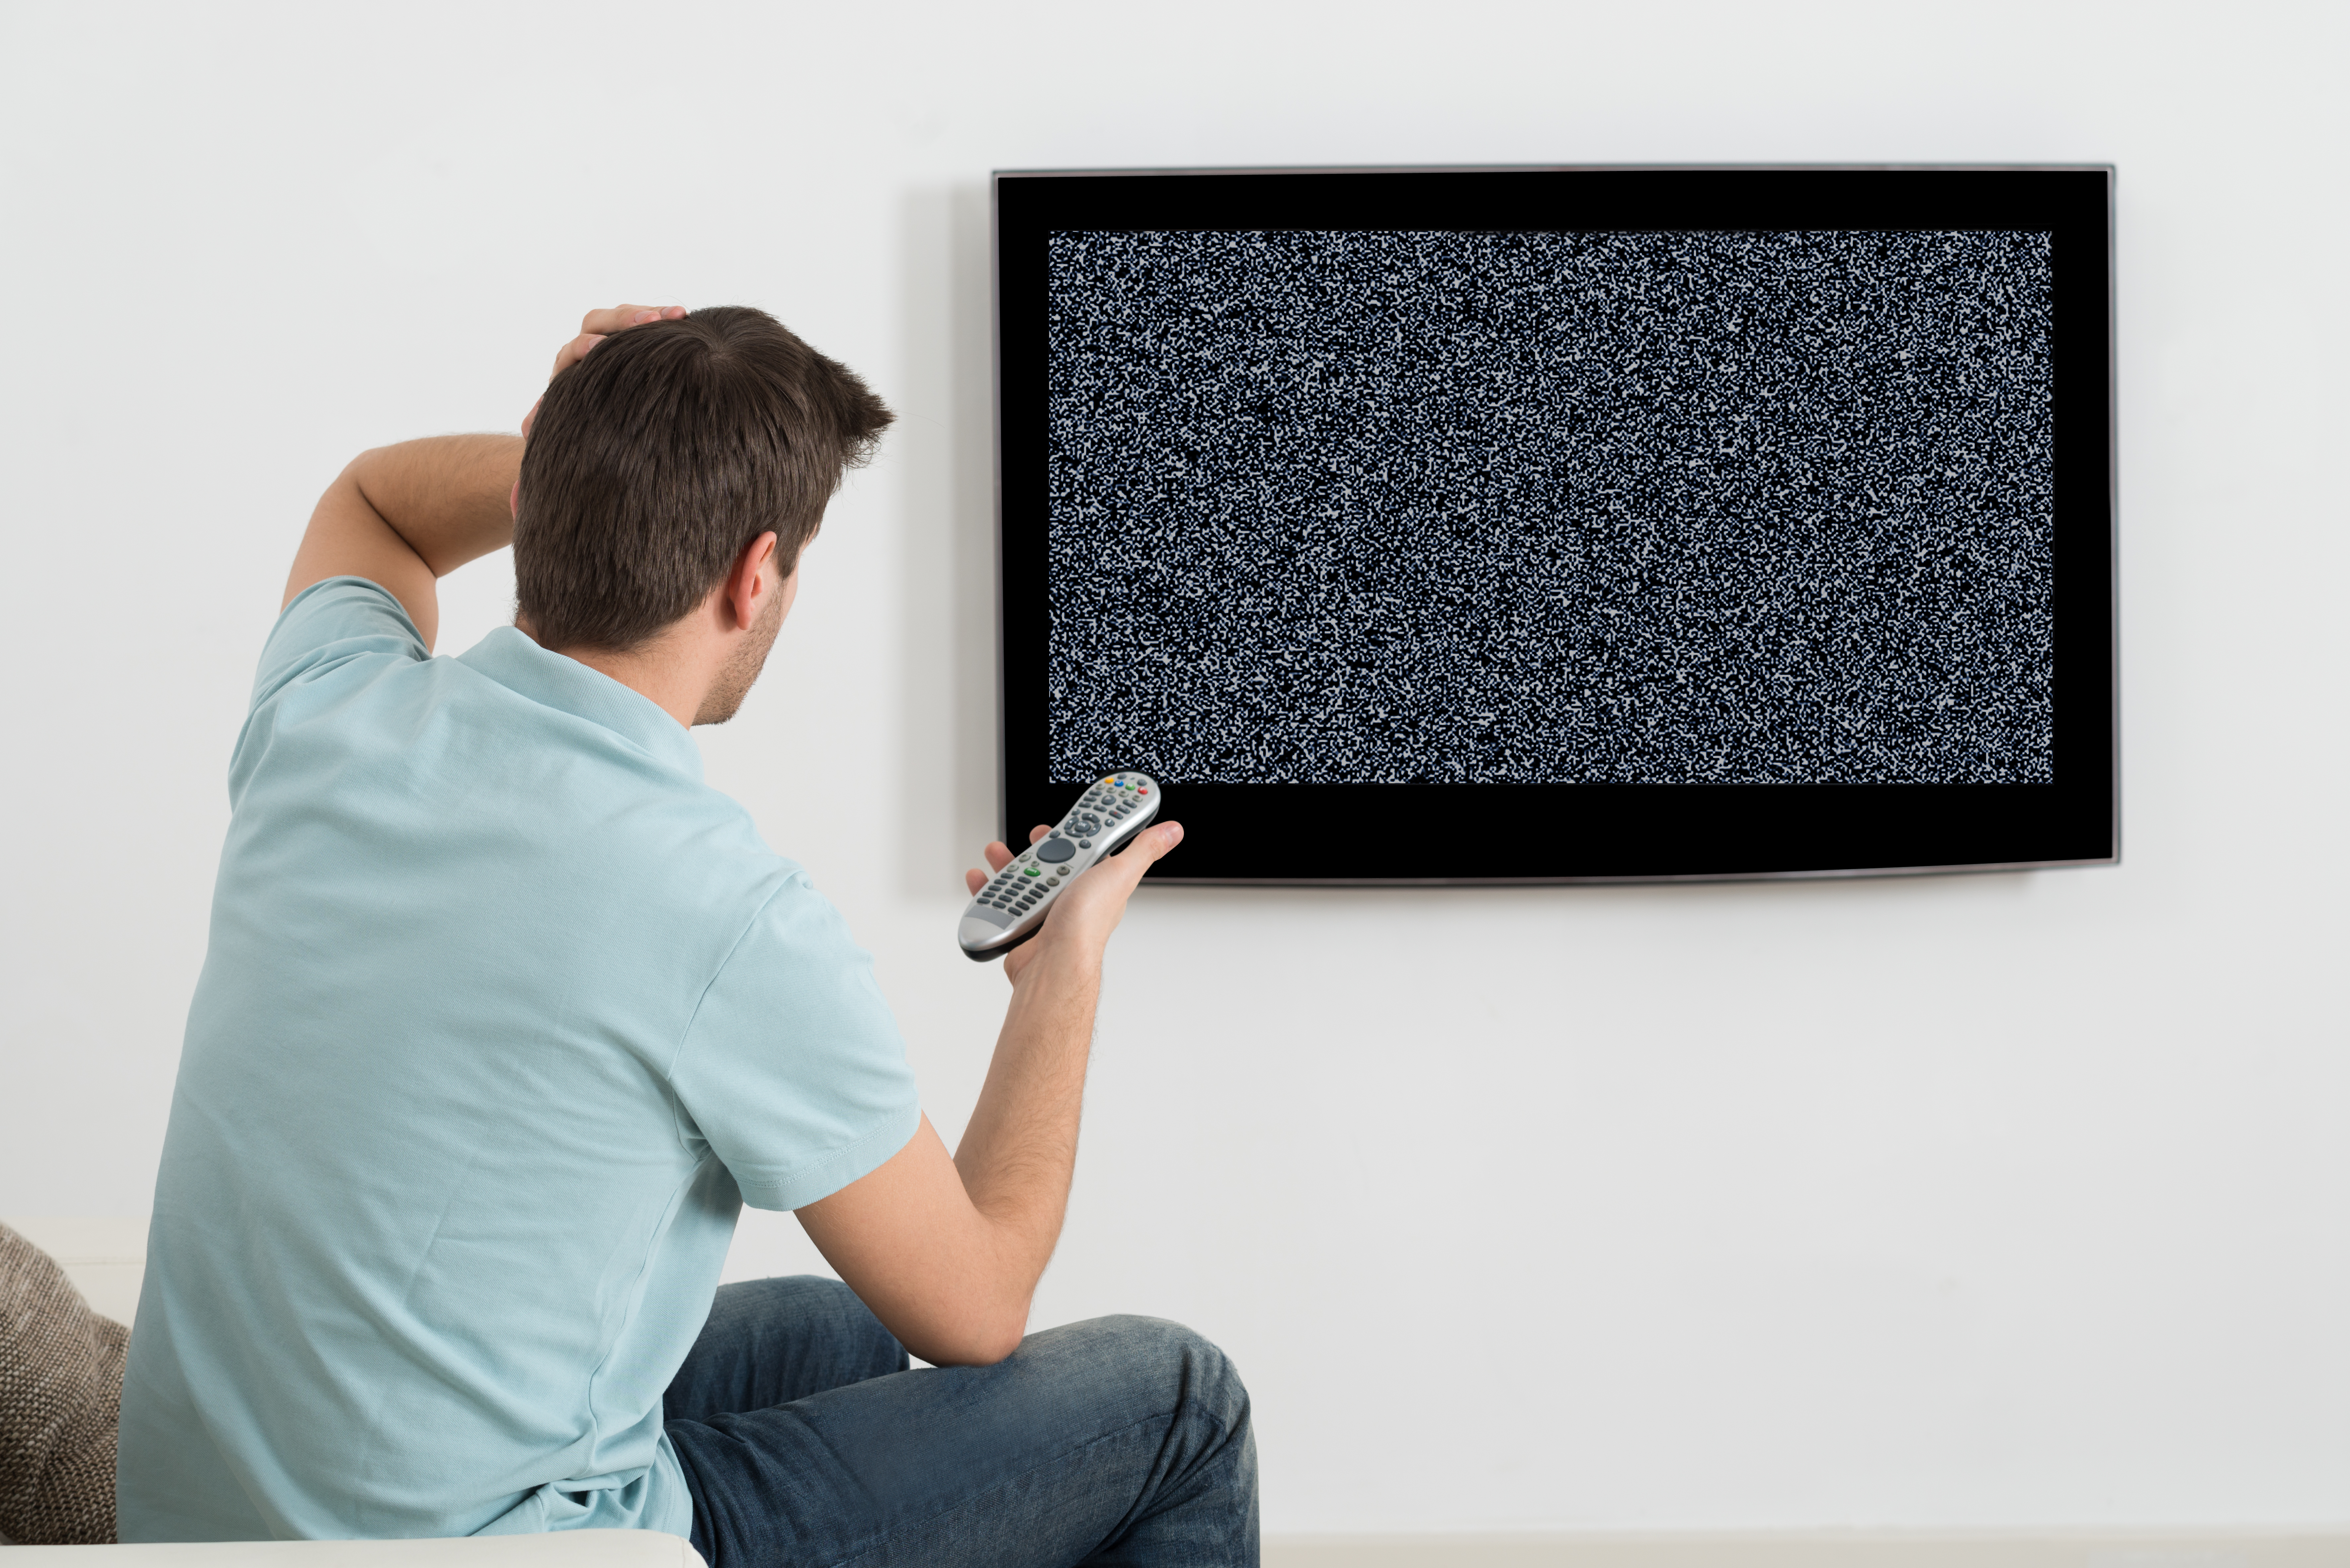 A confused man trying to turn on a TV | Source: Shutterstock